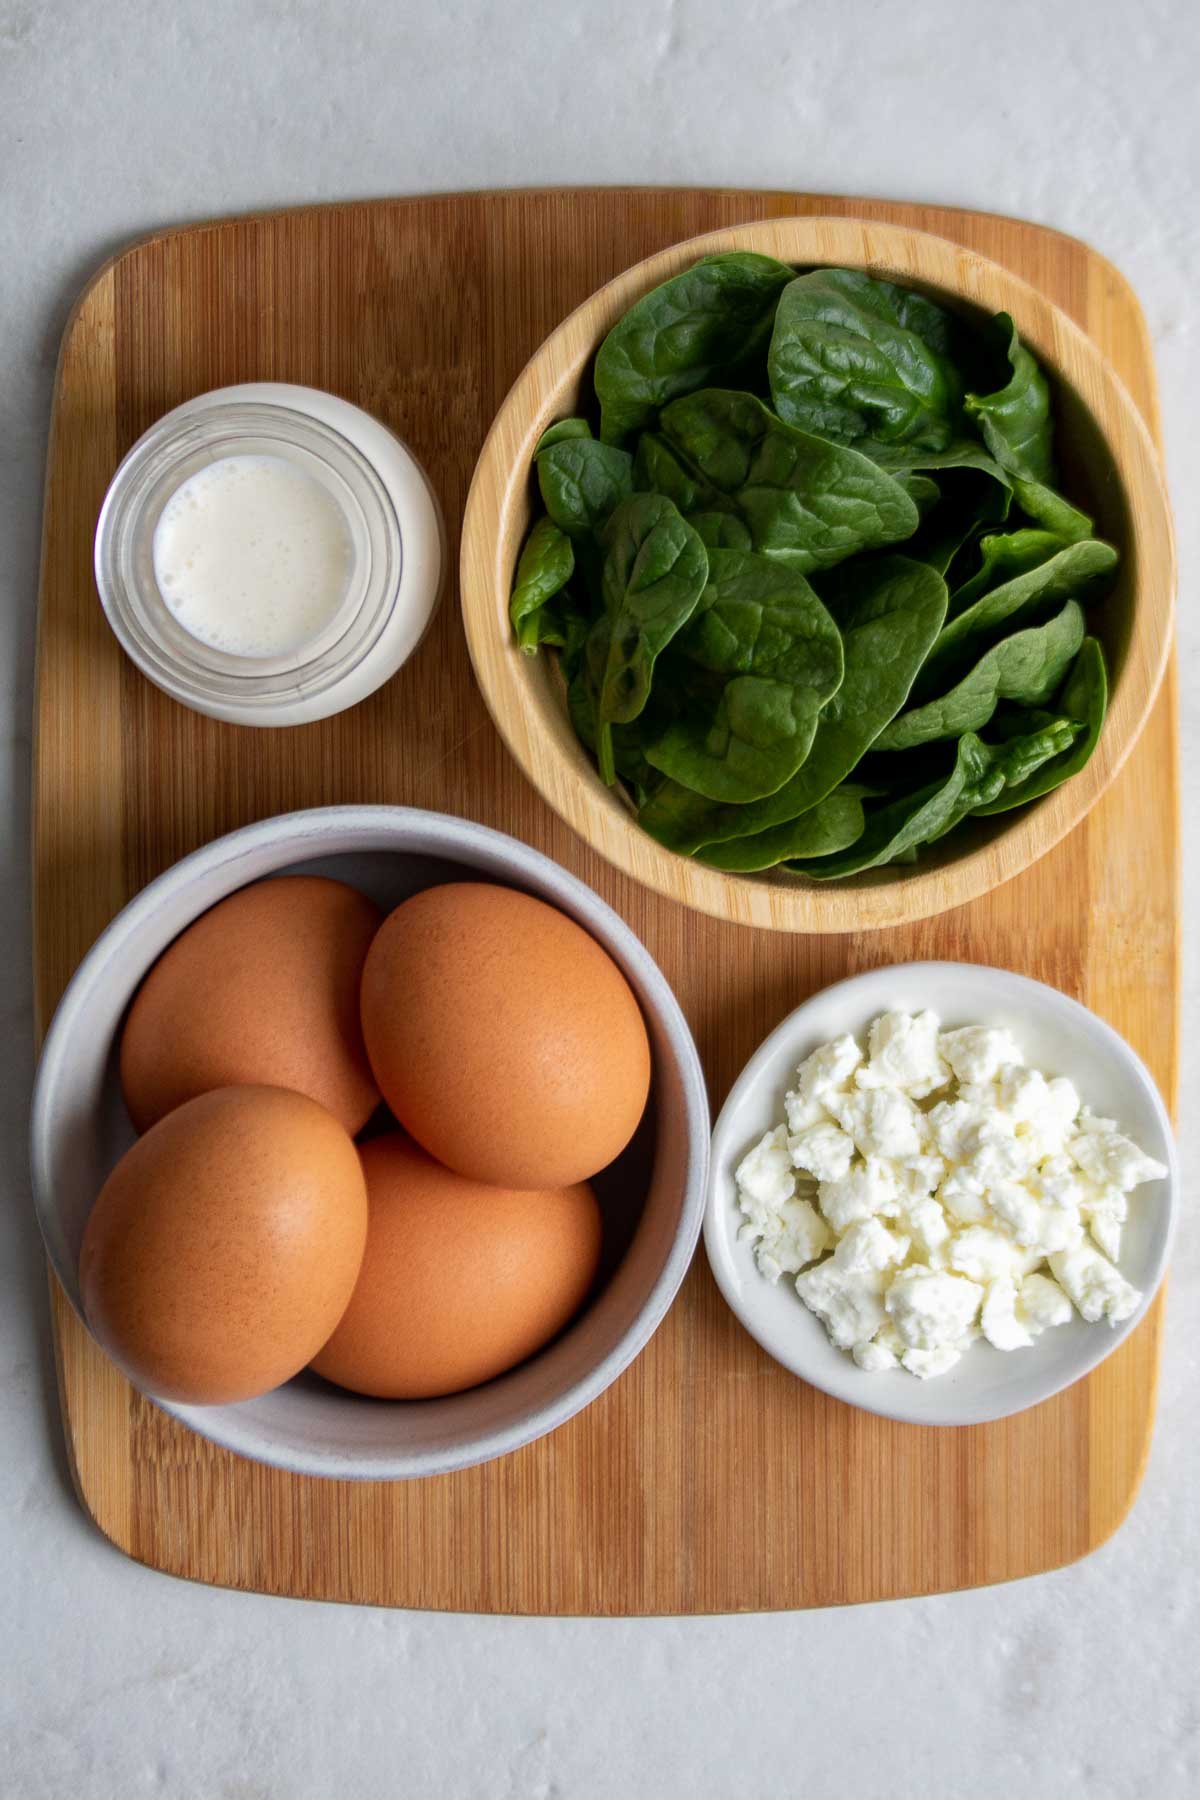 Ingredients for spinach baked eggs; eggs, spinach, heavy cream, and goat cheese.